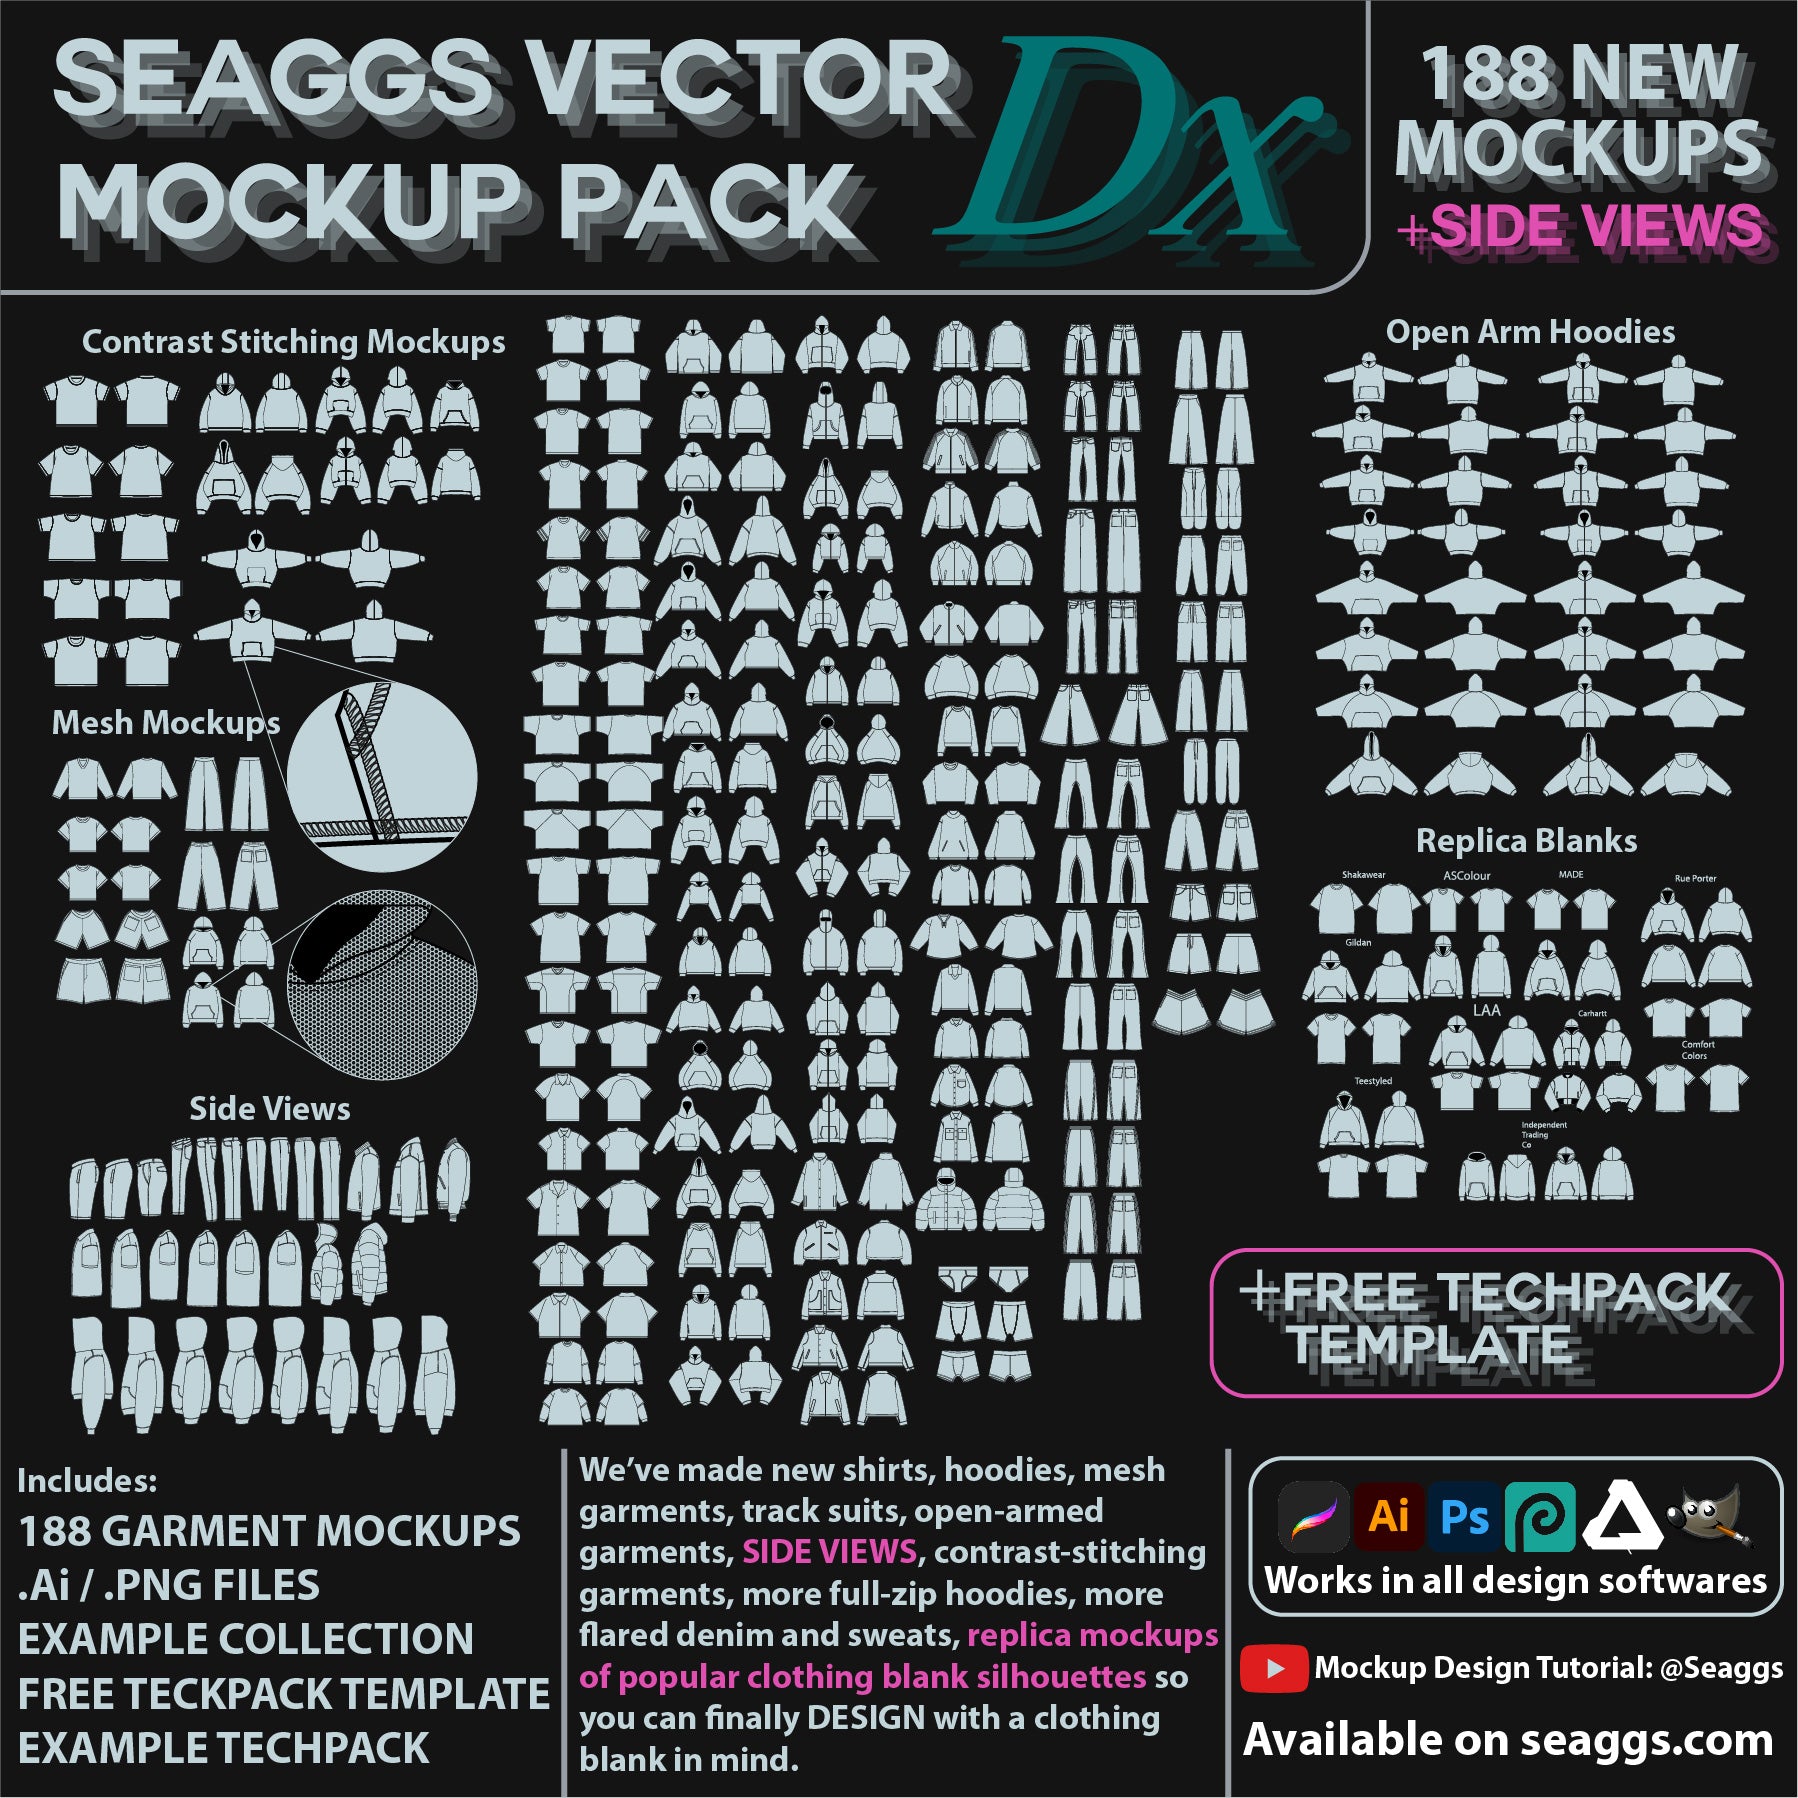 Seaggs Premium Vector Mockup Pack Dx